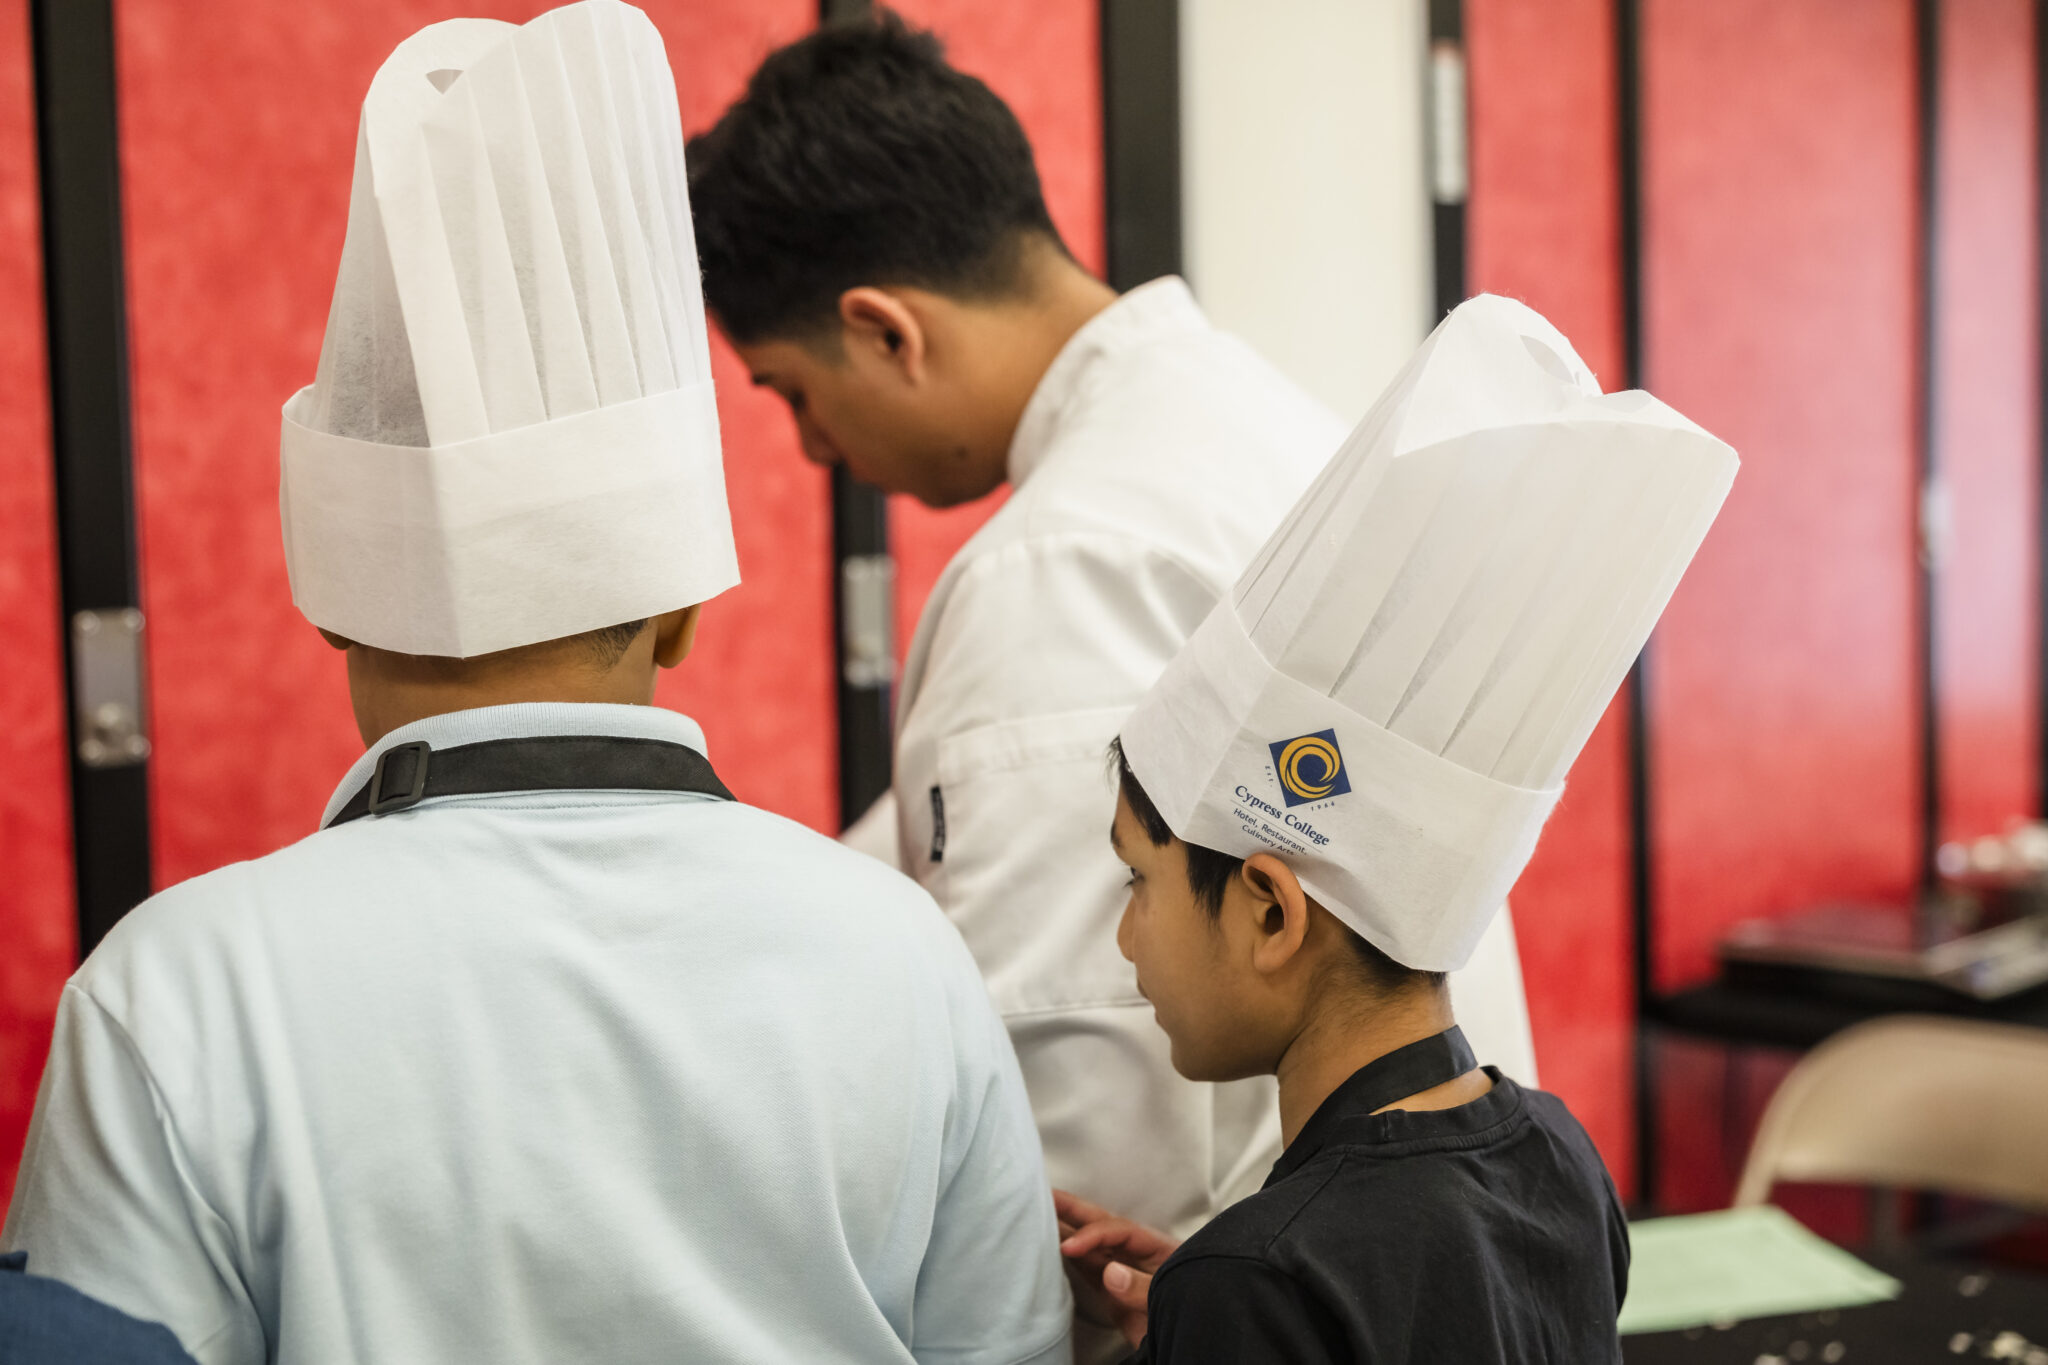 Elementary students look on as Cypress Students coach them in food preparation.